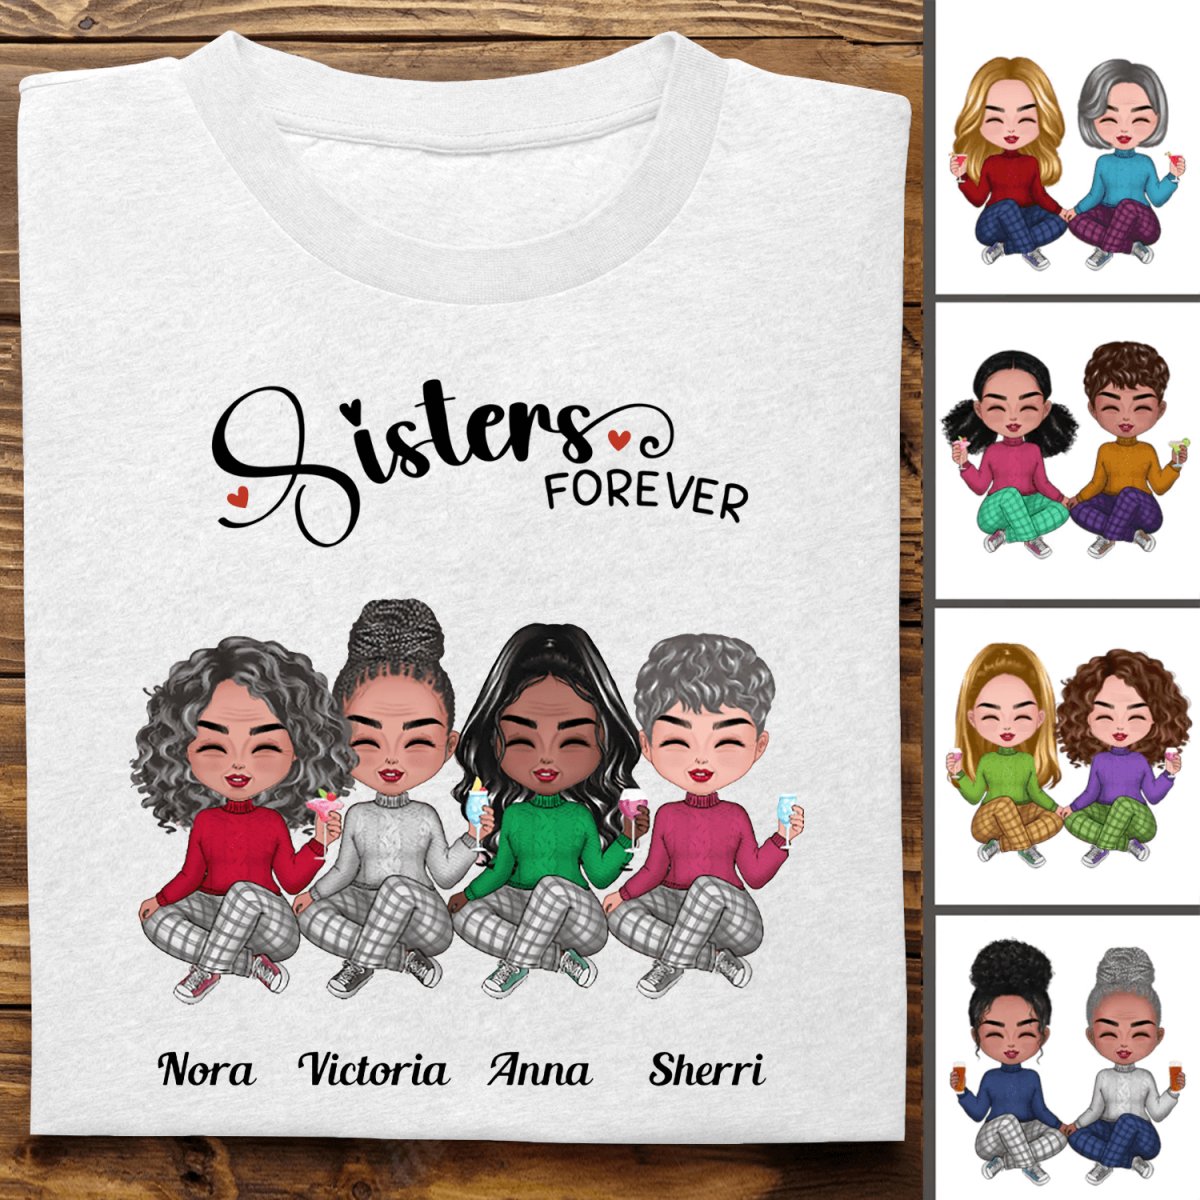 Discover Sisters - Sisters Forever - Personalized T-Shirt